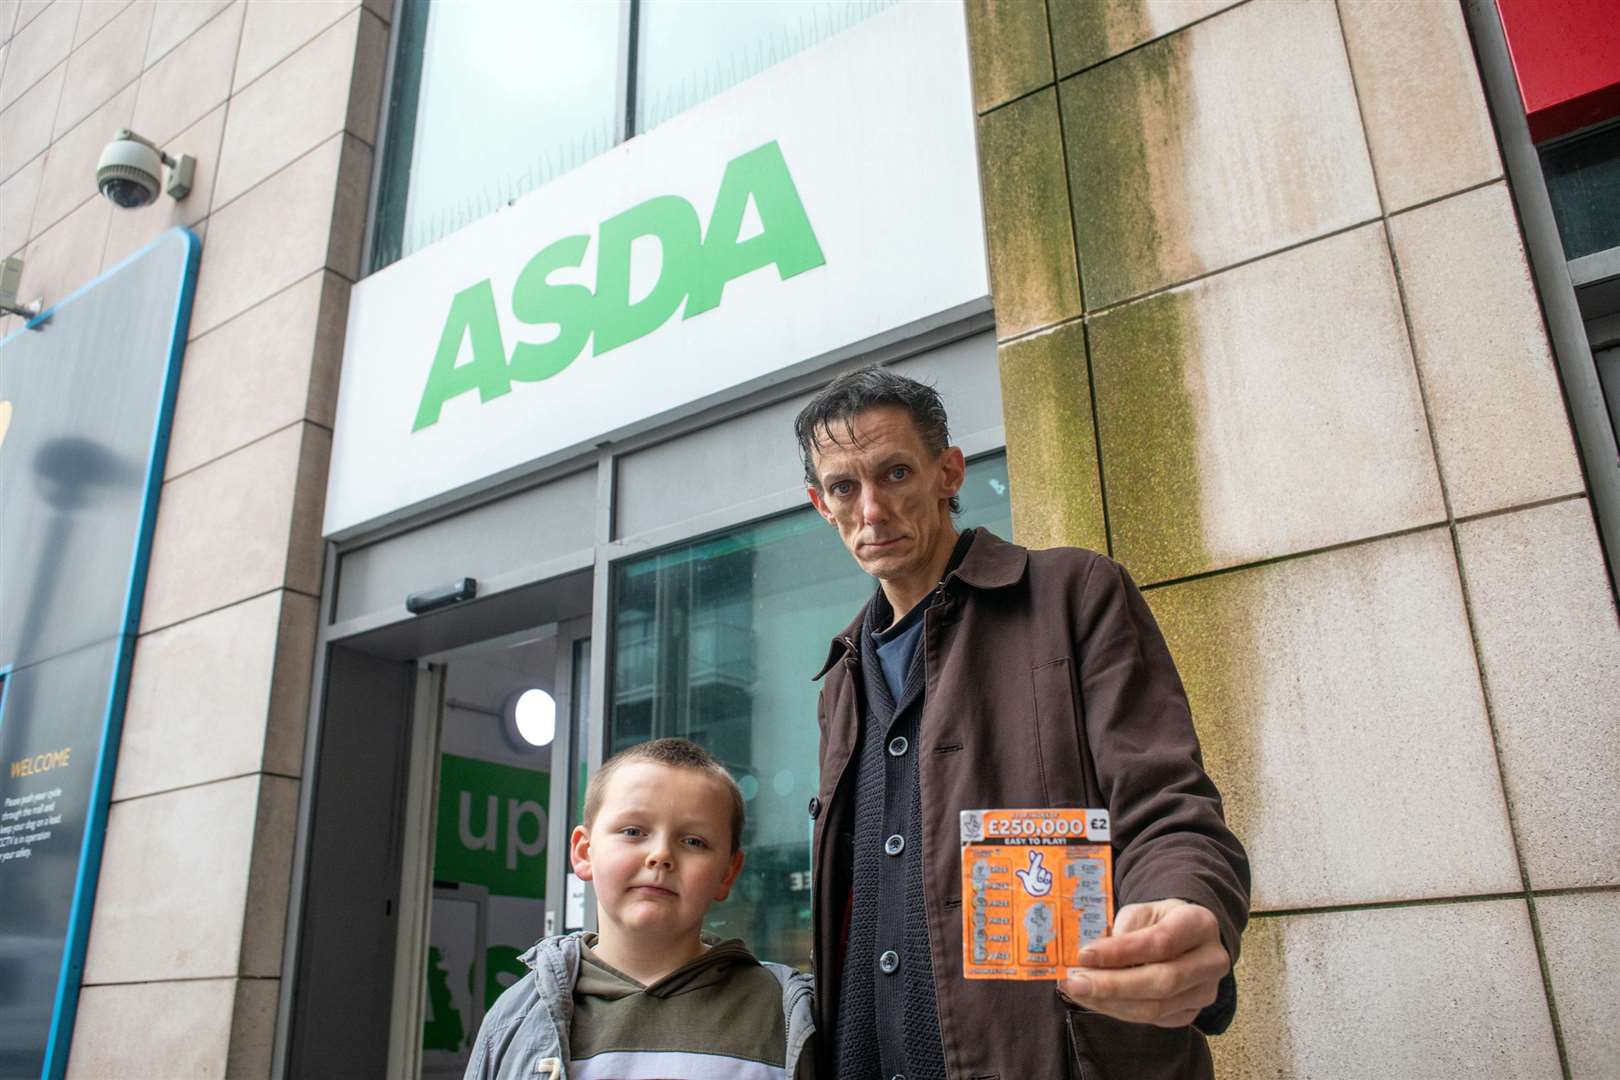 James Fletcher-Retallick and his 7 year old son Ronnie, stood outside of the Asda in Folkestone. Picture: SWNS